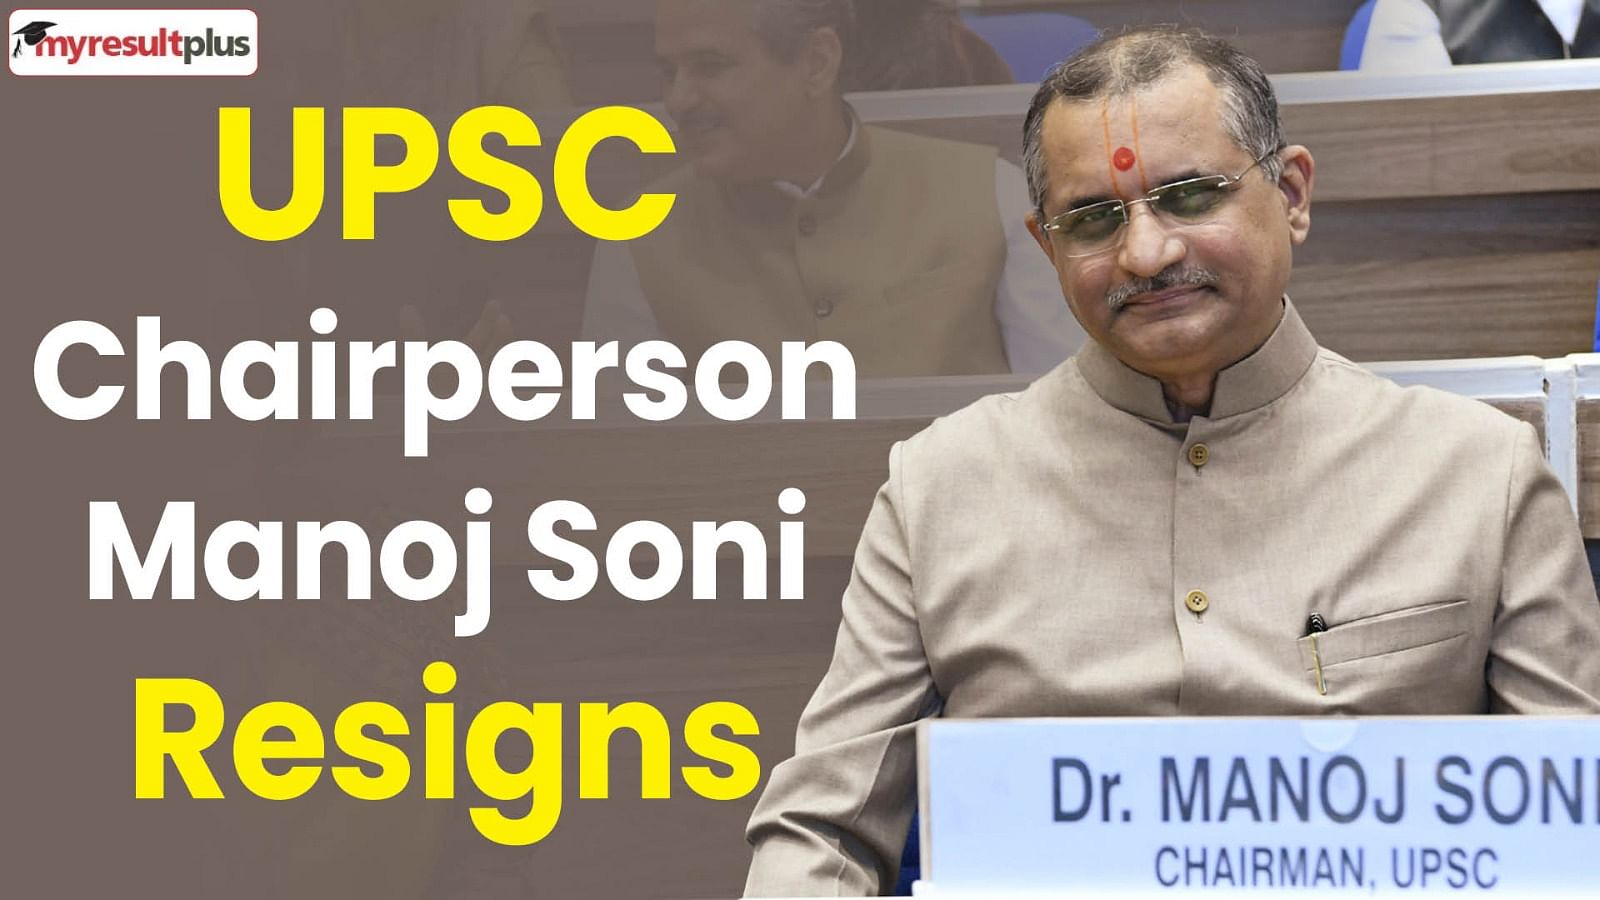 UPSC Chairperson Manoj Soni resigns 5 years before tenure ends citing personal reasons, Read here